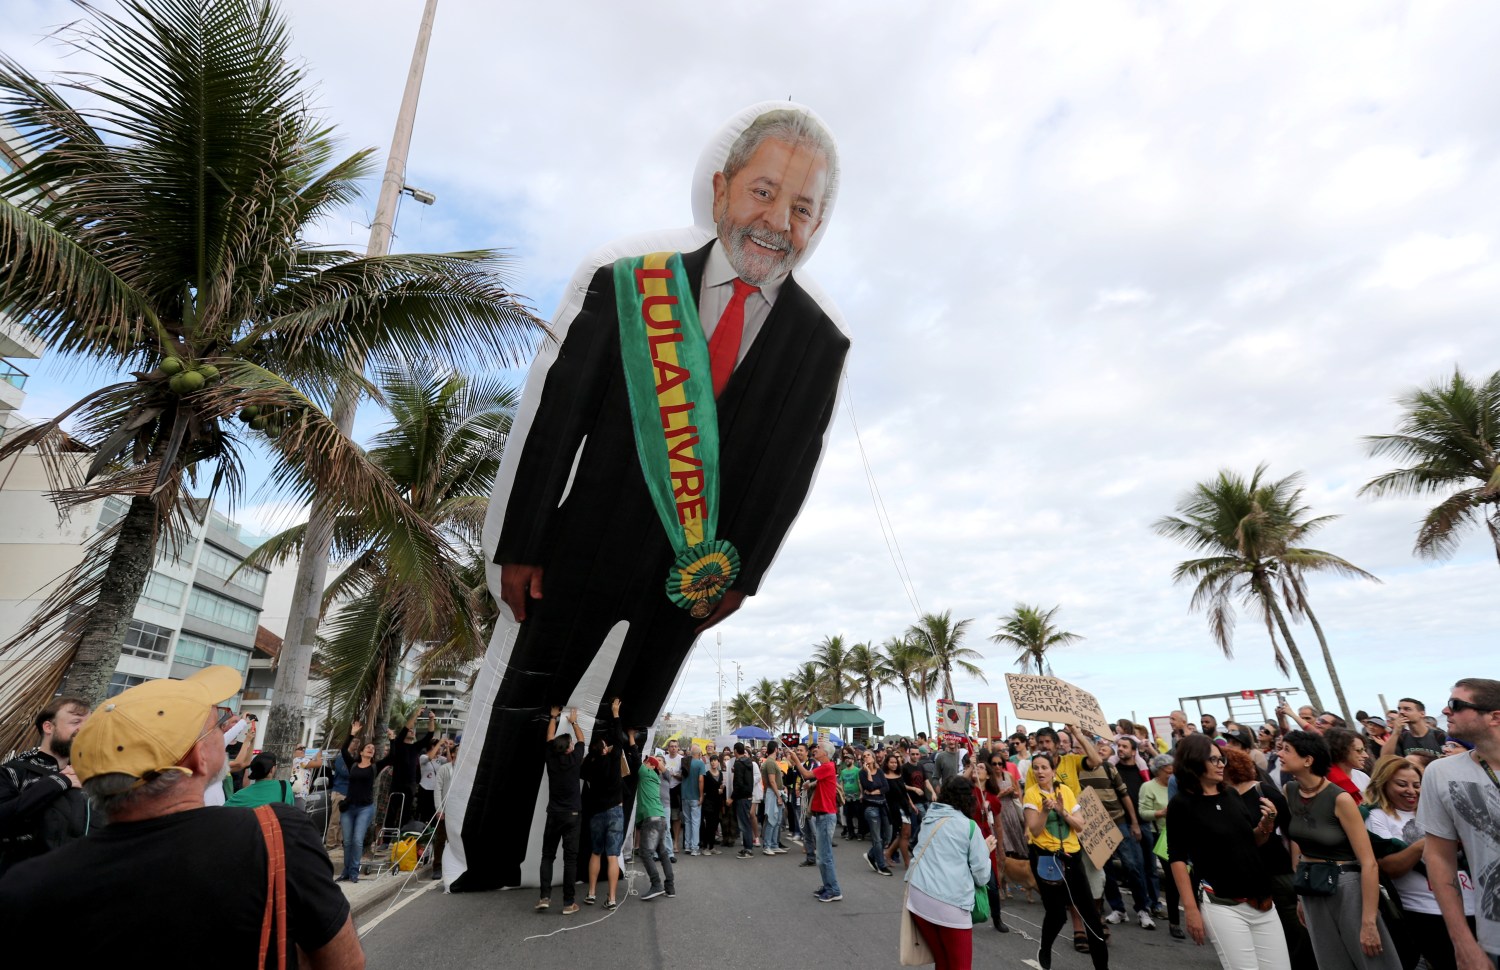 People hold an inflatable doll of former Brazilian president Luiz Inacio Lula da Silva ahead of the demonstration to demand more protection for the Amazon rainforest, in Rio de Janeiro, Brazil August 25, 2019. The sash reads "Lula free". REUTERS/Sergio Moraes - RC129F36ED80